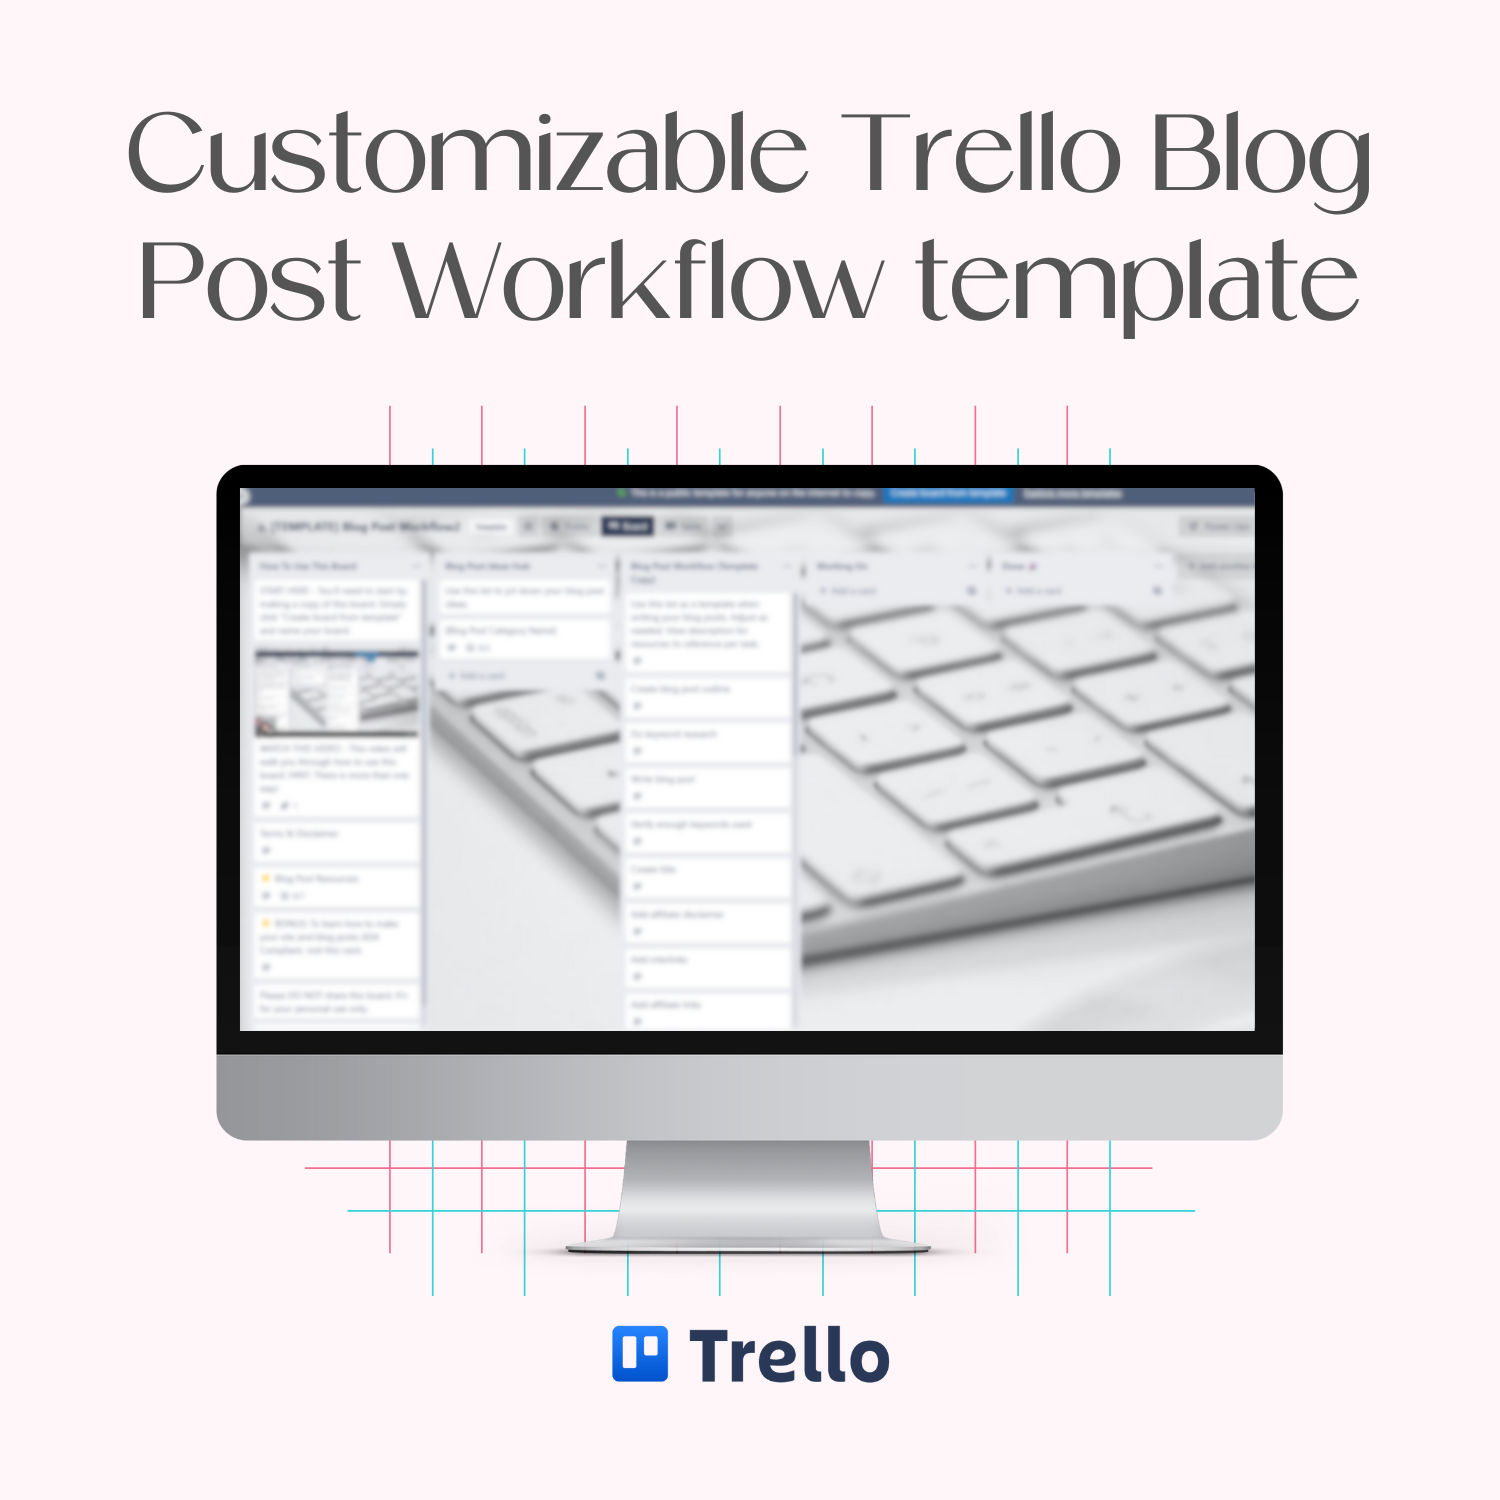 A monitor mockup displaying the customizable Blog Post Workflow Trello board template.